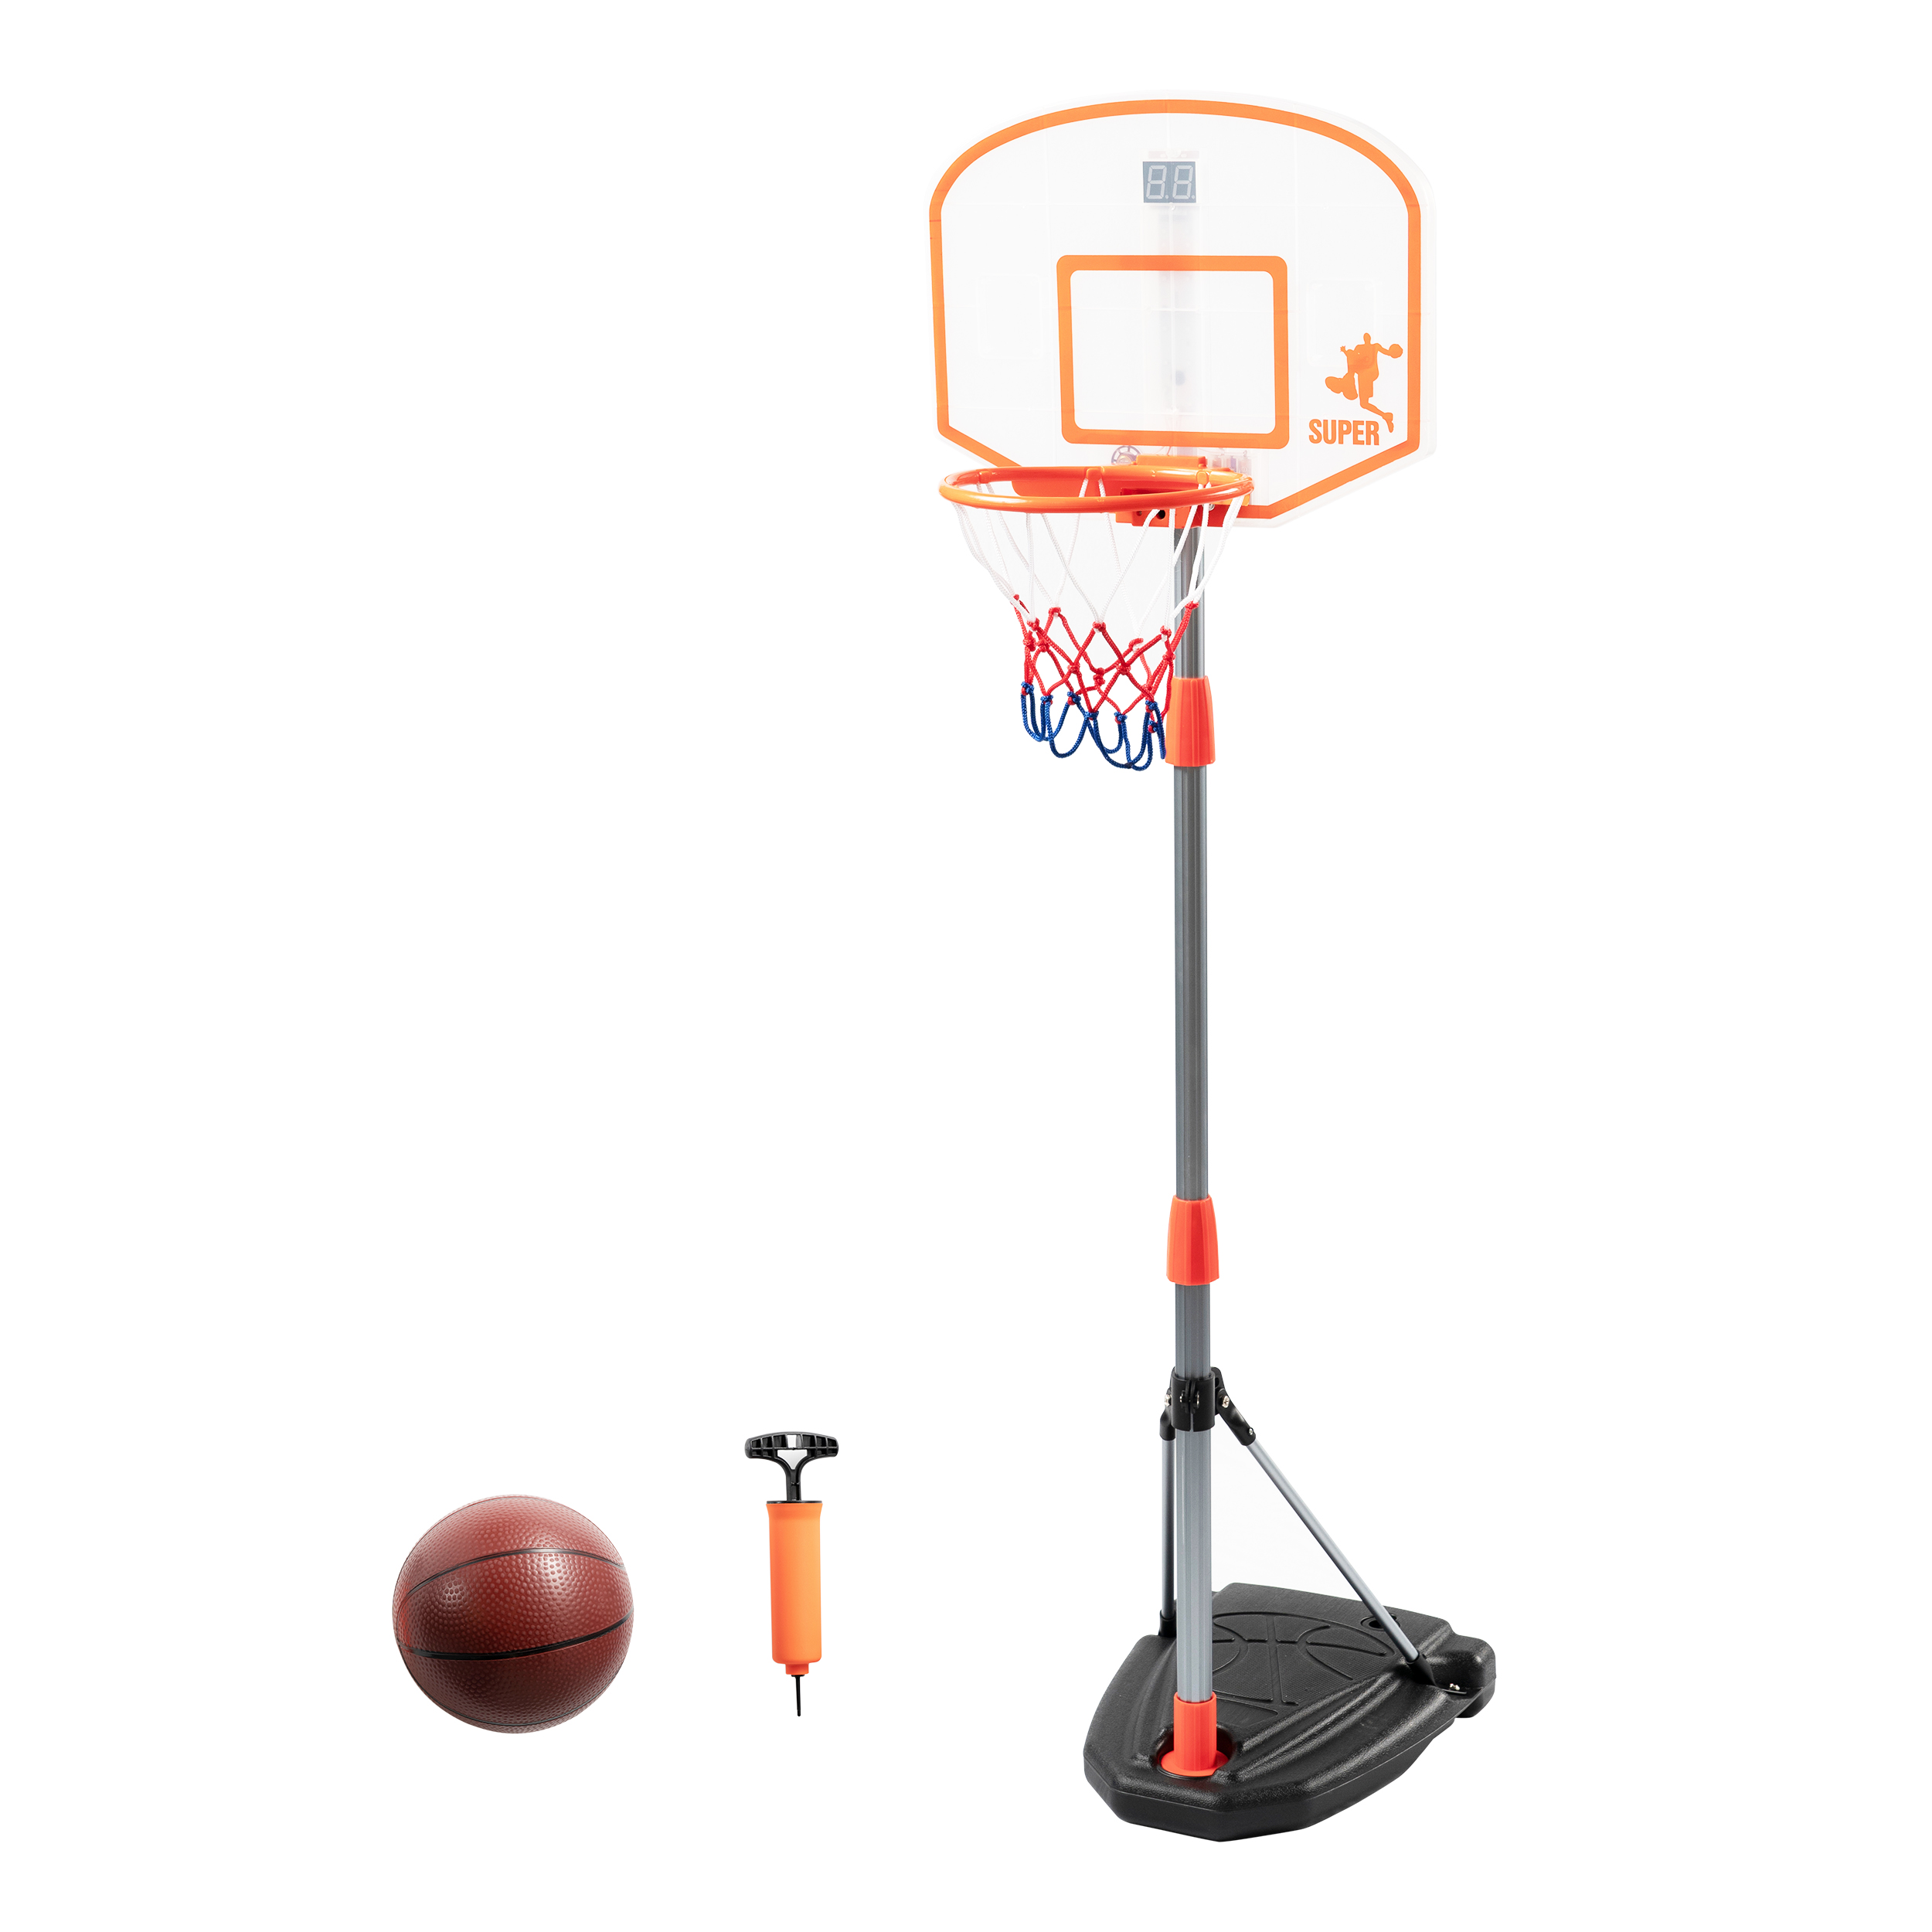 Sport Squad Jumpshot Mini Electronic Arcade Basketball Game with Light Up Basketball, 5.5' Basketball Hoop, 1ct Basketball, 1ct Air Pump - image 1 of 6